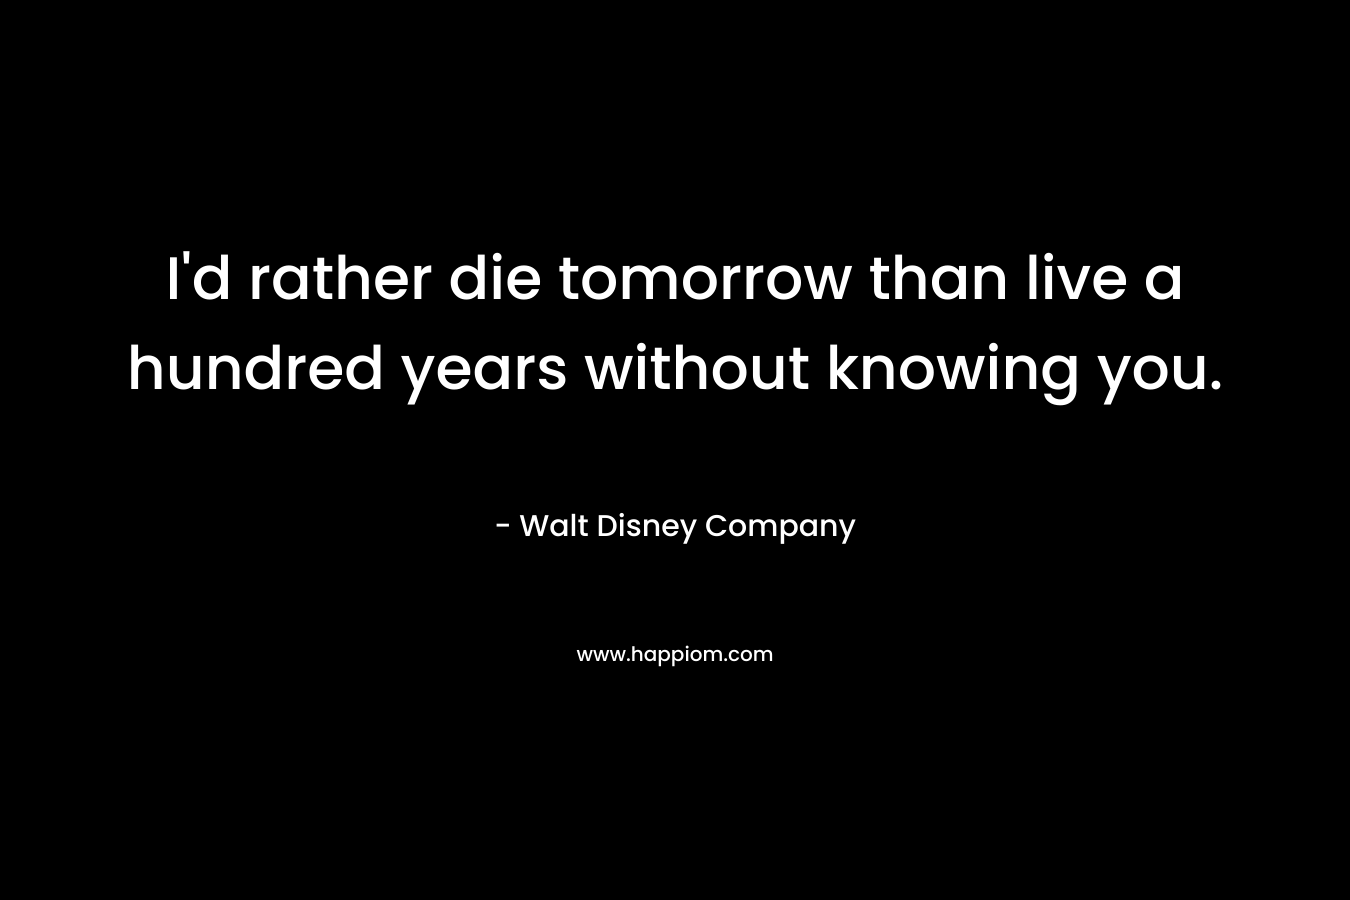 I’d rather die tomorrow than live a hundred years without knowing you. – Walt Disney Company